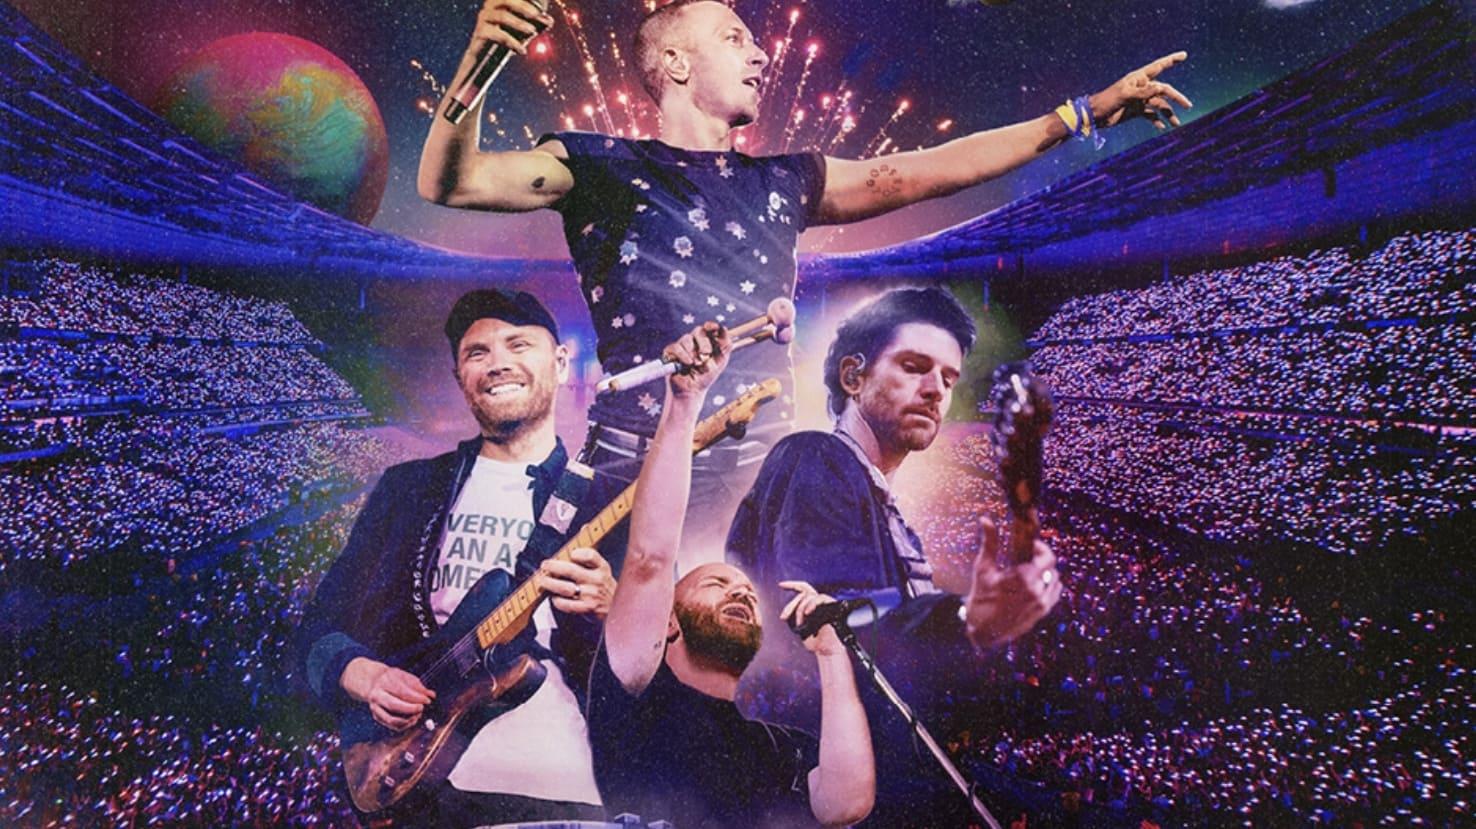 Coldplay: Music of the Spheres - Live Broadcast from Buenos Aires backdrop